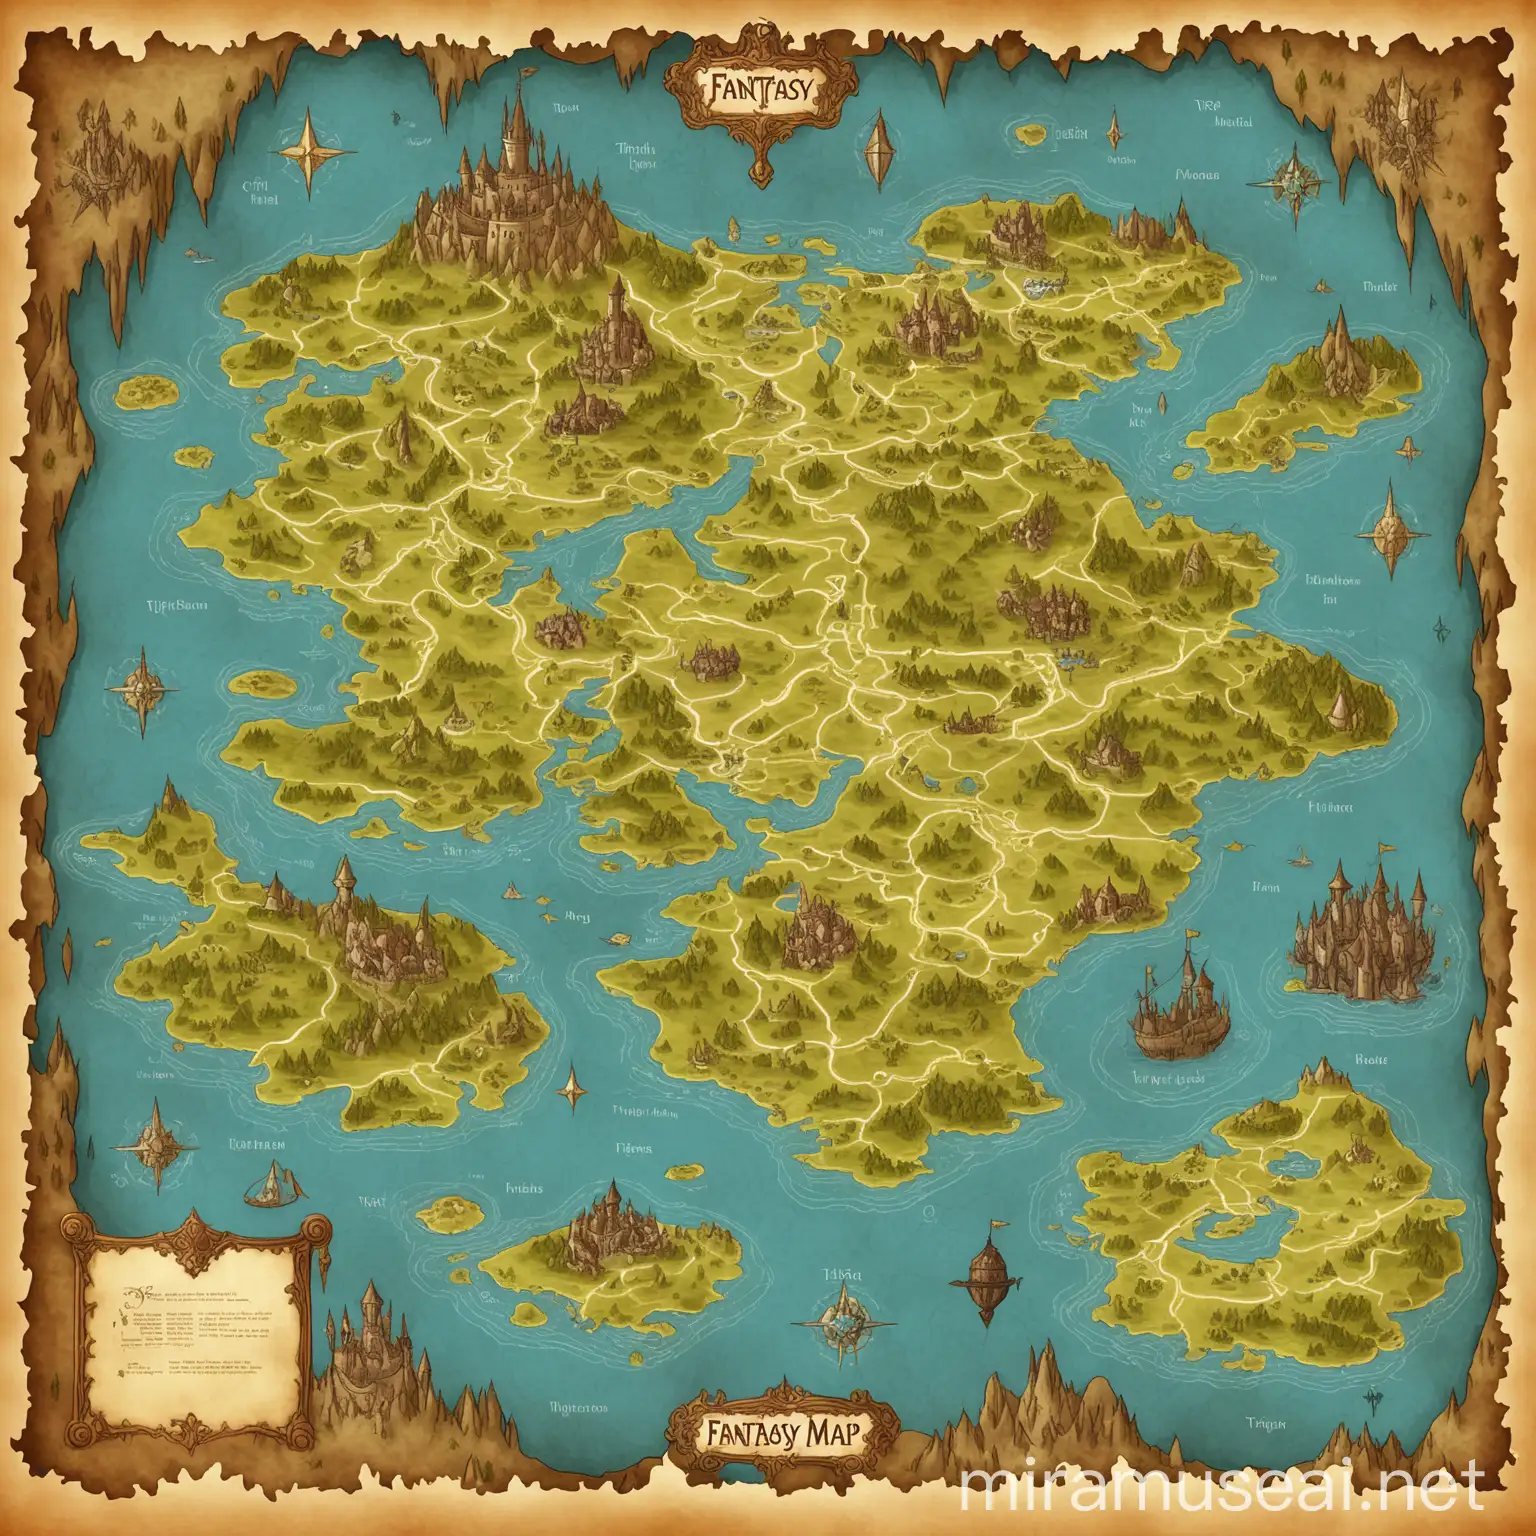 Enchanting Fantasy Map Illustrated Imagery of Mystical Lands and Adventure Routes